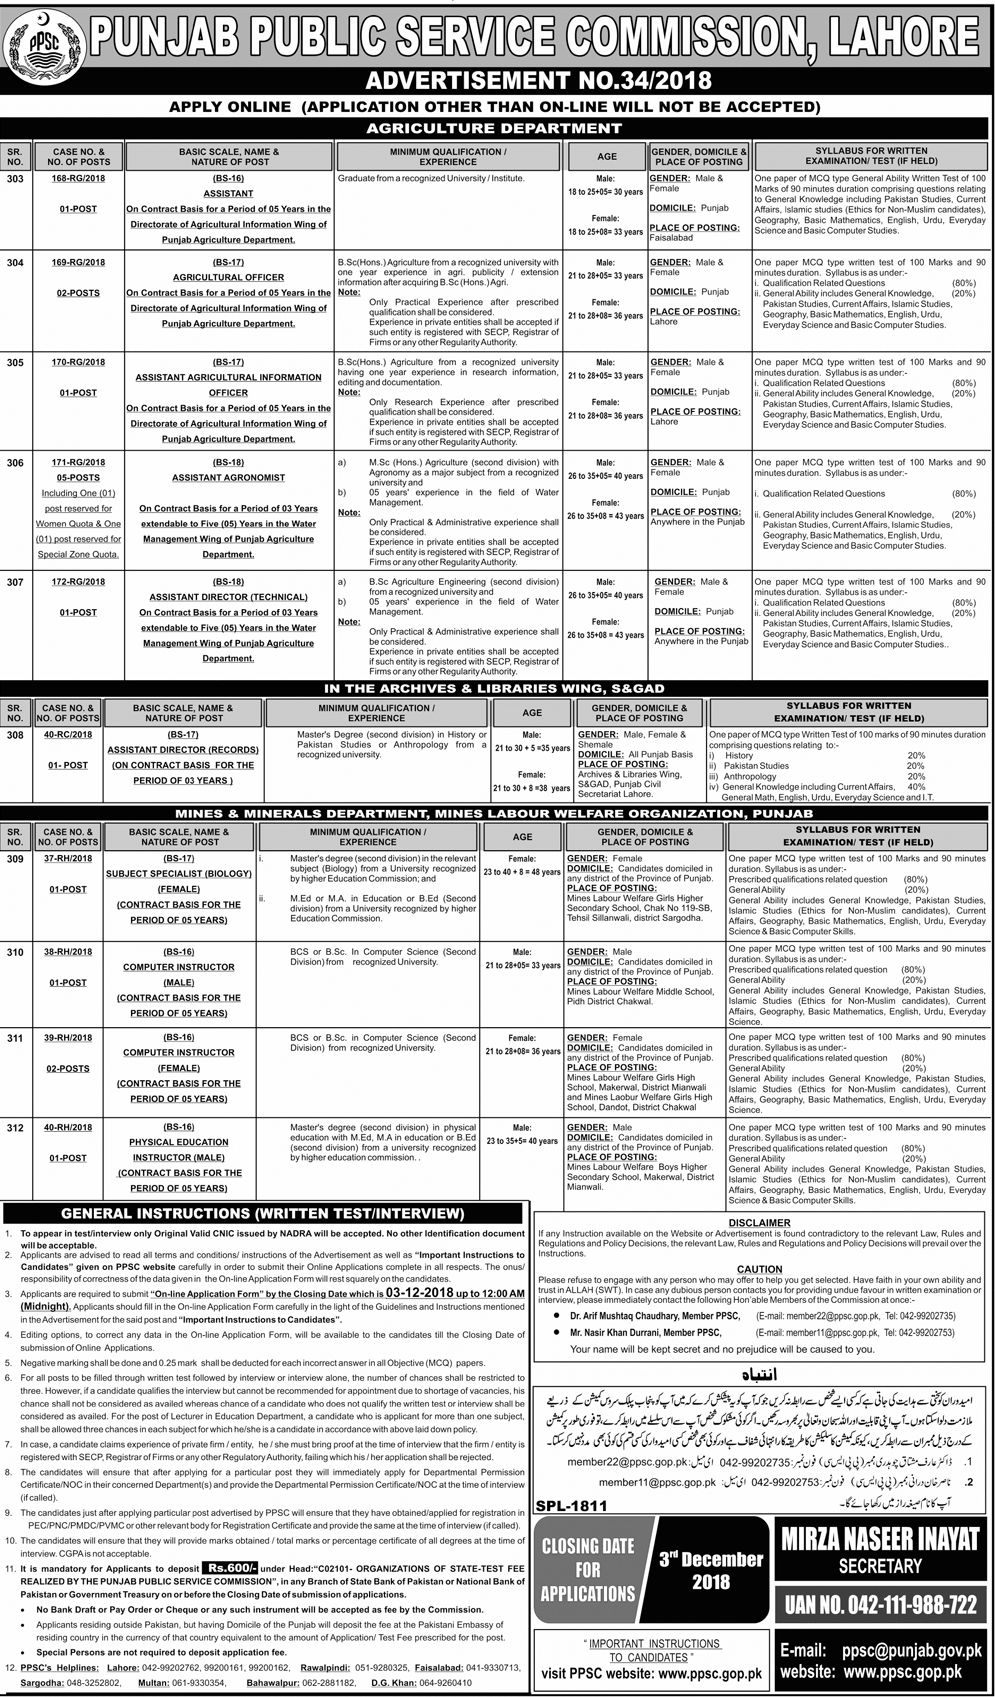 PPSC Jobs of Agriculture Officer, Assistant Director Technial, Subject Specialist Biology, Computer Instructor and Physical Education Instructor in Agriculture Department 2018 latest